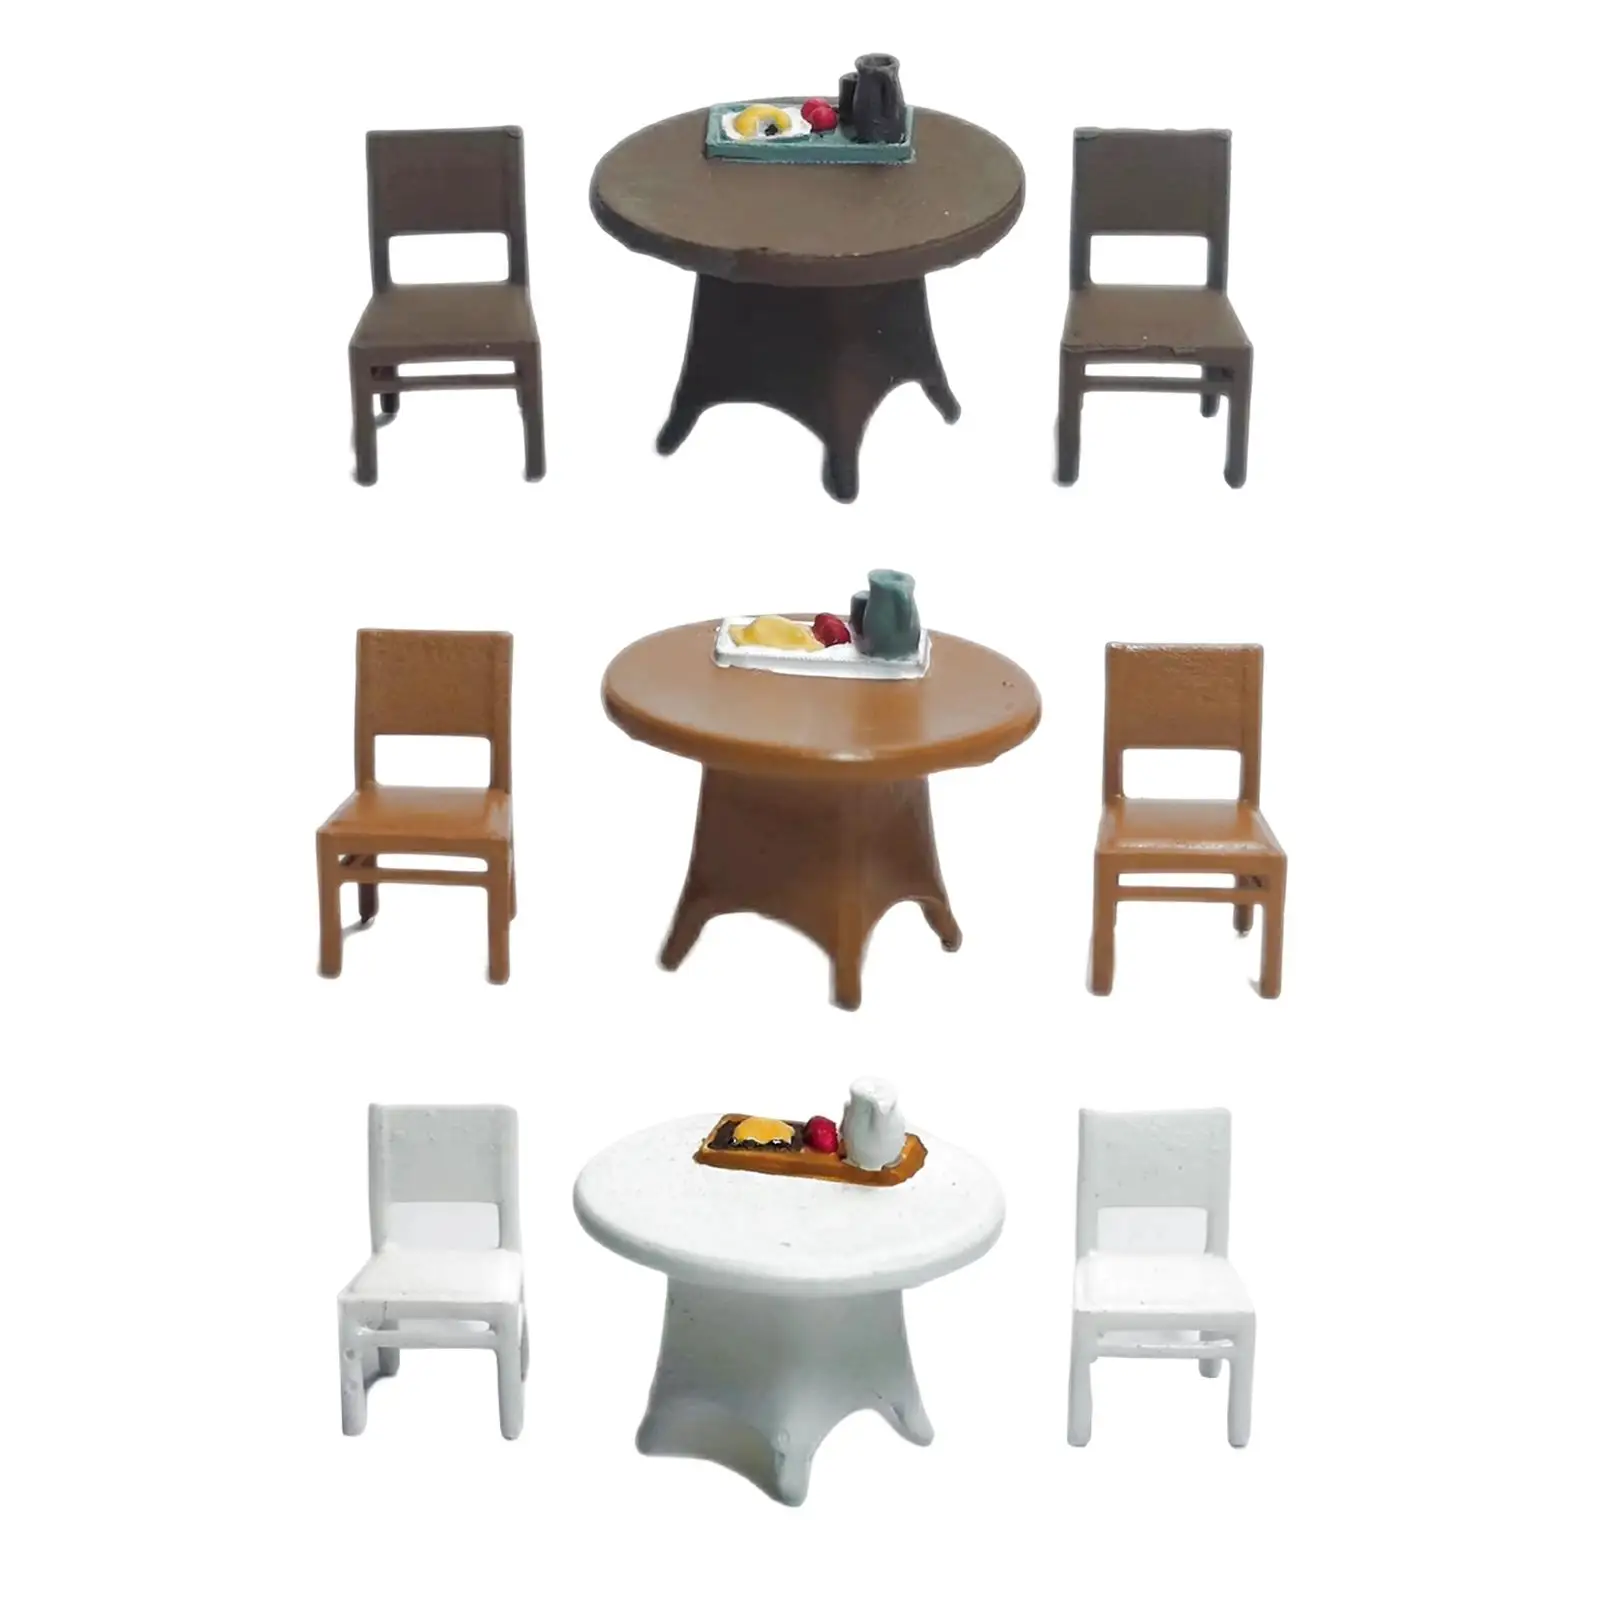 3x Hand Painted 1/64 Table and Chair Model Layout Decoration Beach Scenery